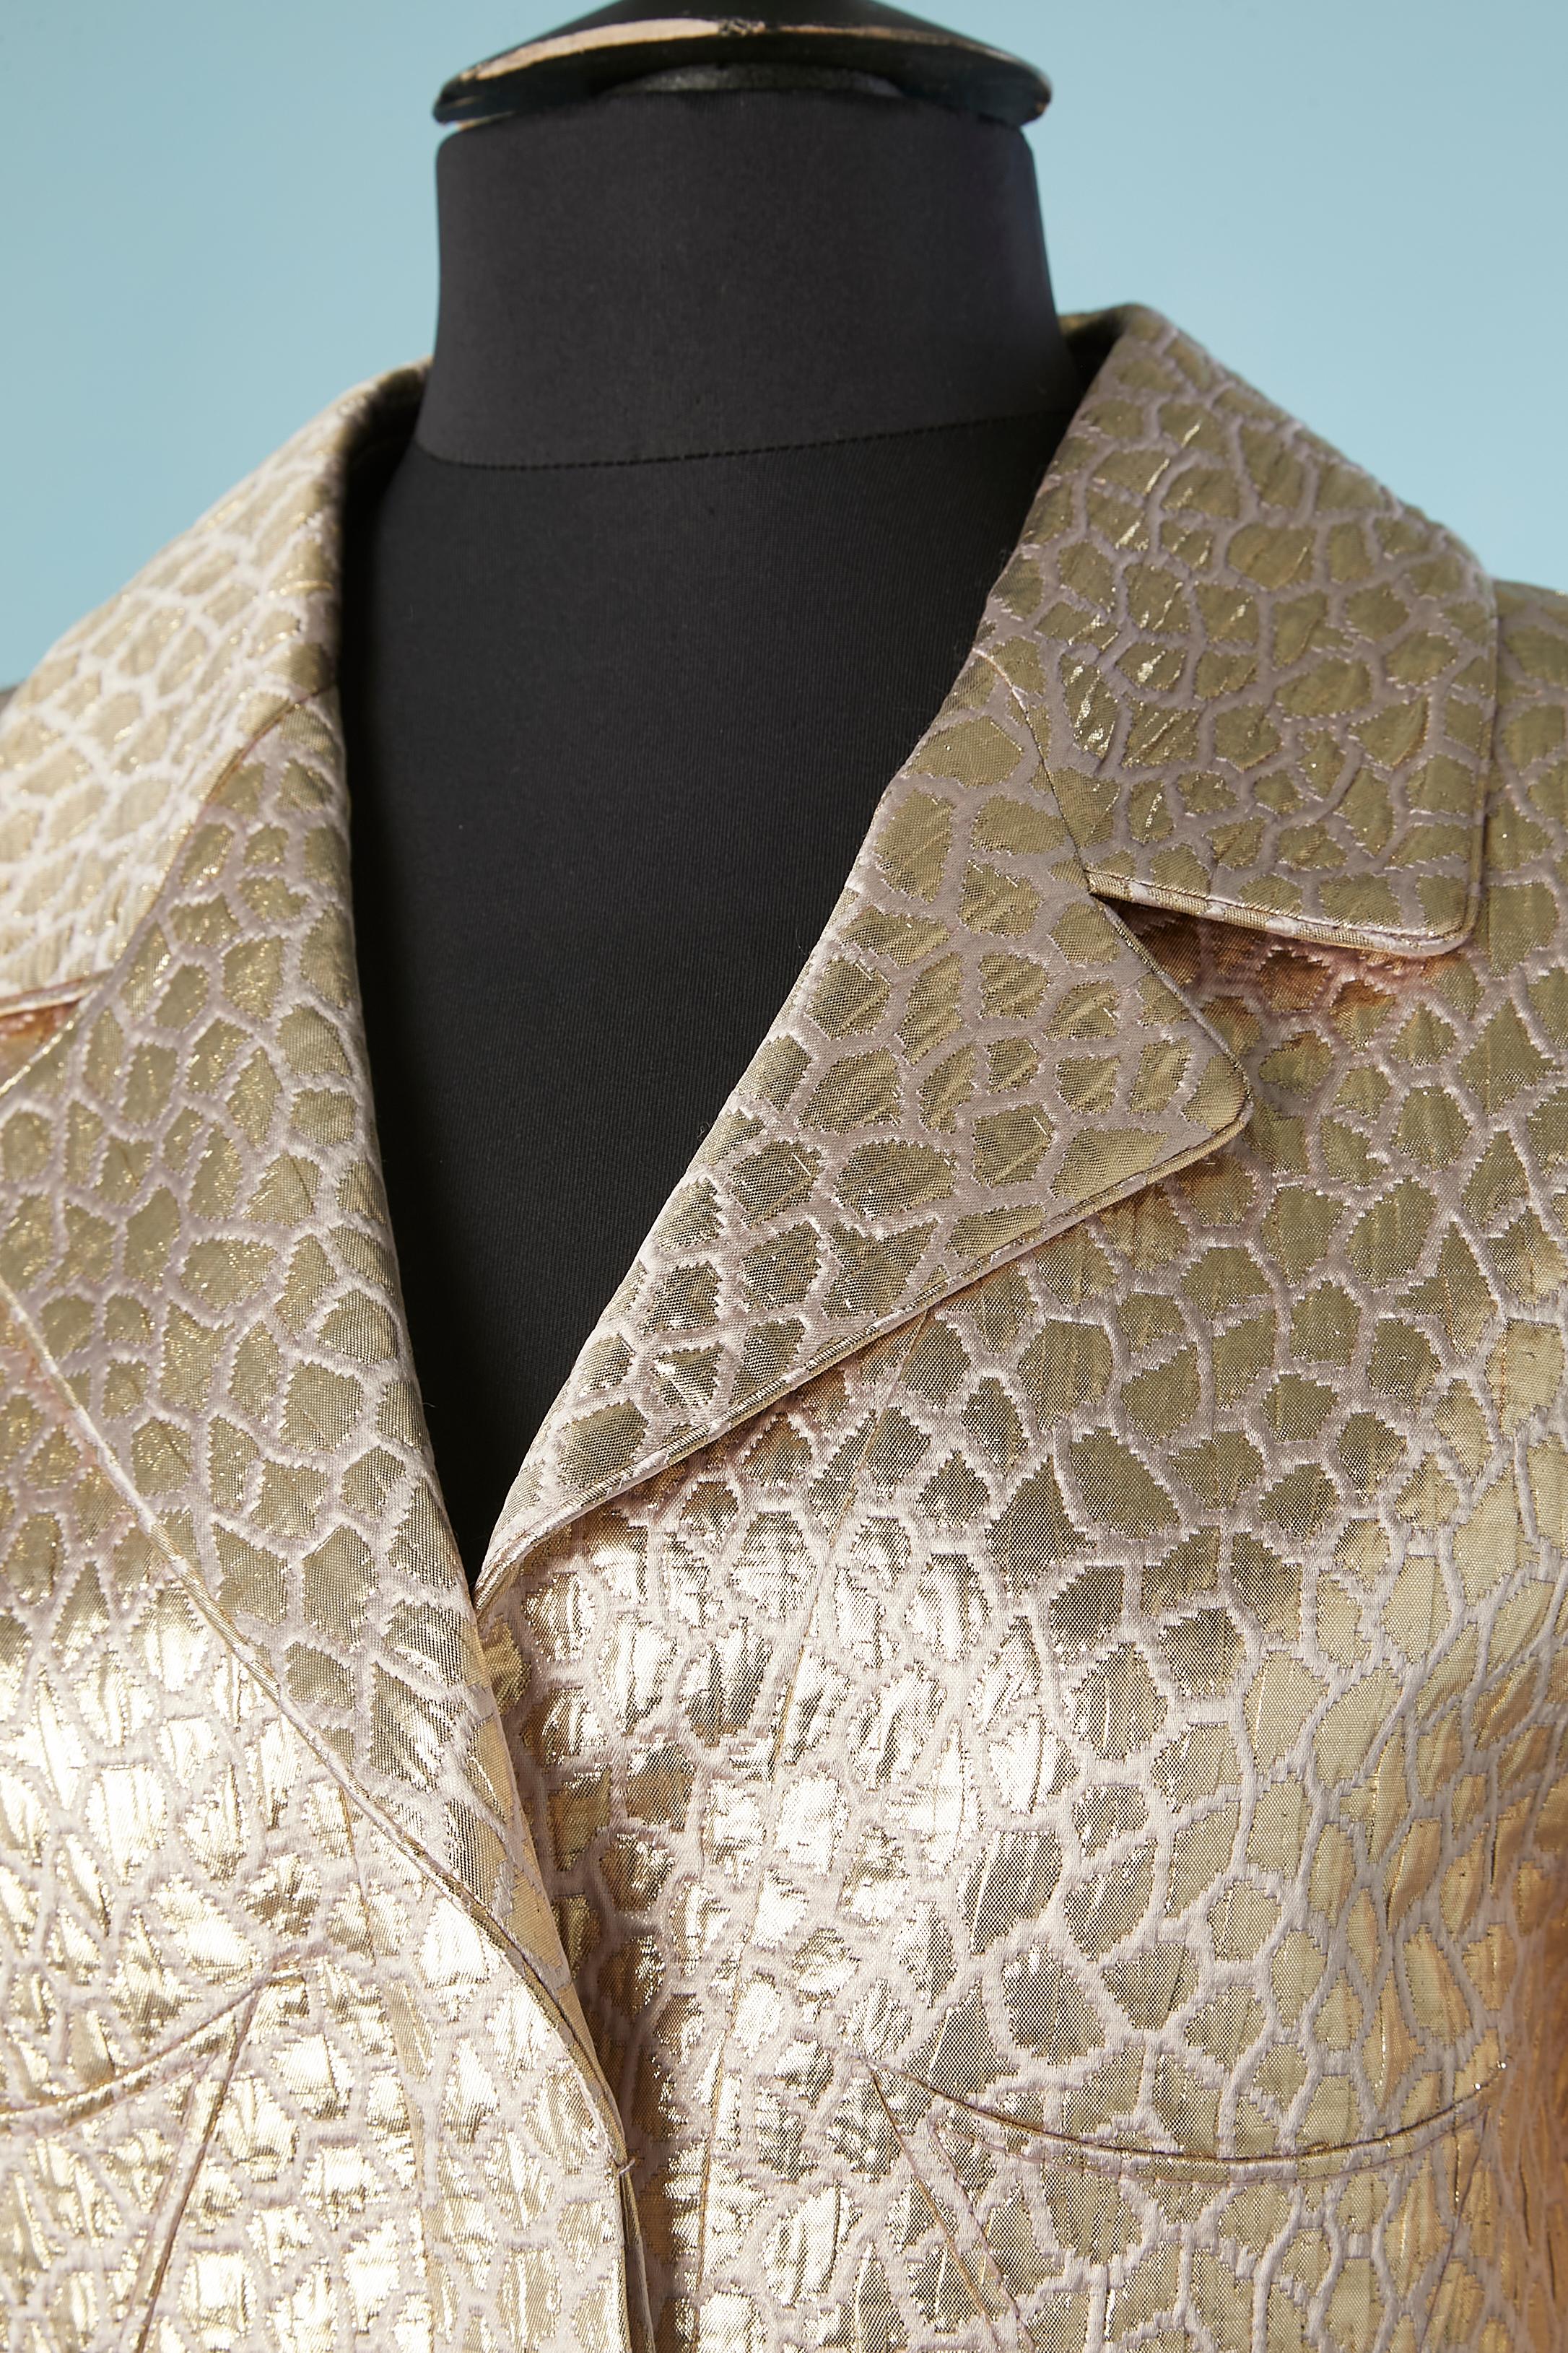 Evening brocade single- breasted  jacket . Fabric composition: 50% silk 30% acrilyc, 20% polyester.
Lining: 100% polyester 
New with tag. 2 extras buttons provided.
SIZE 6